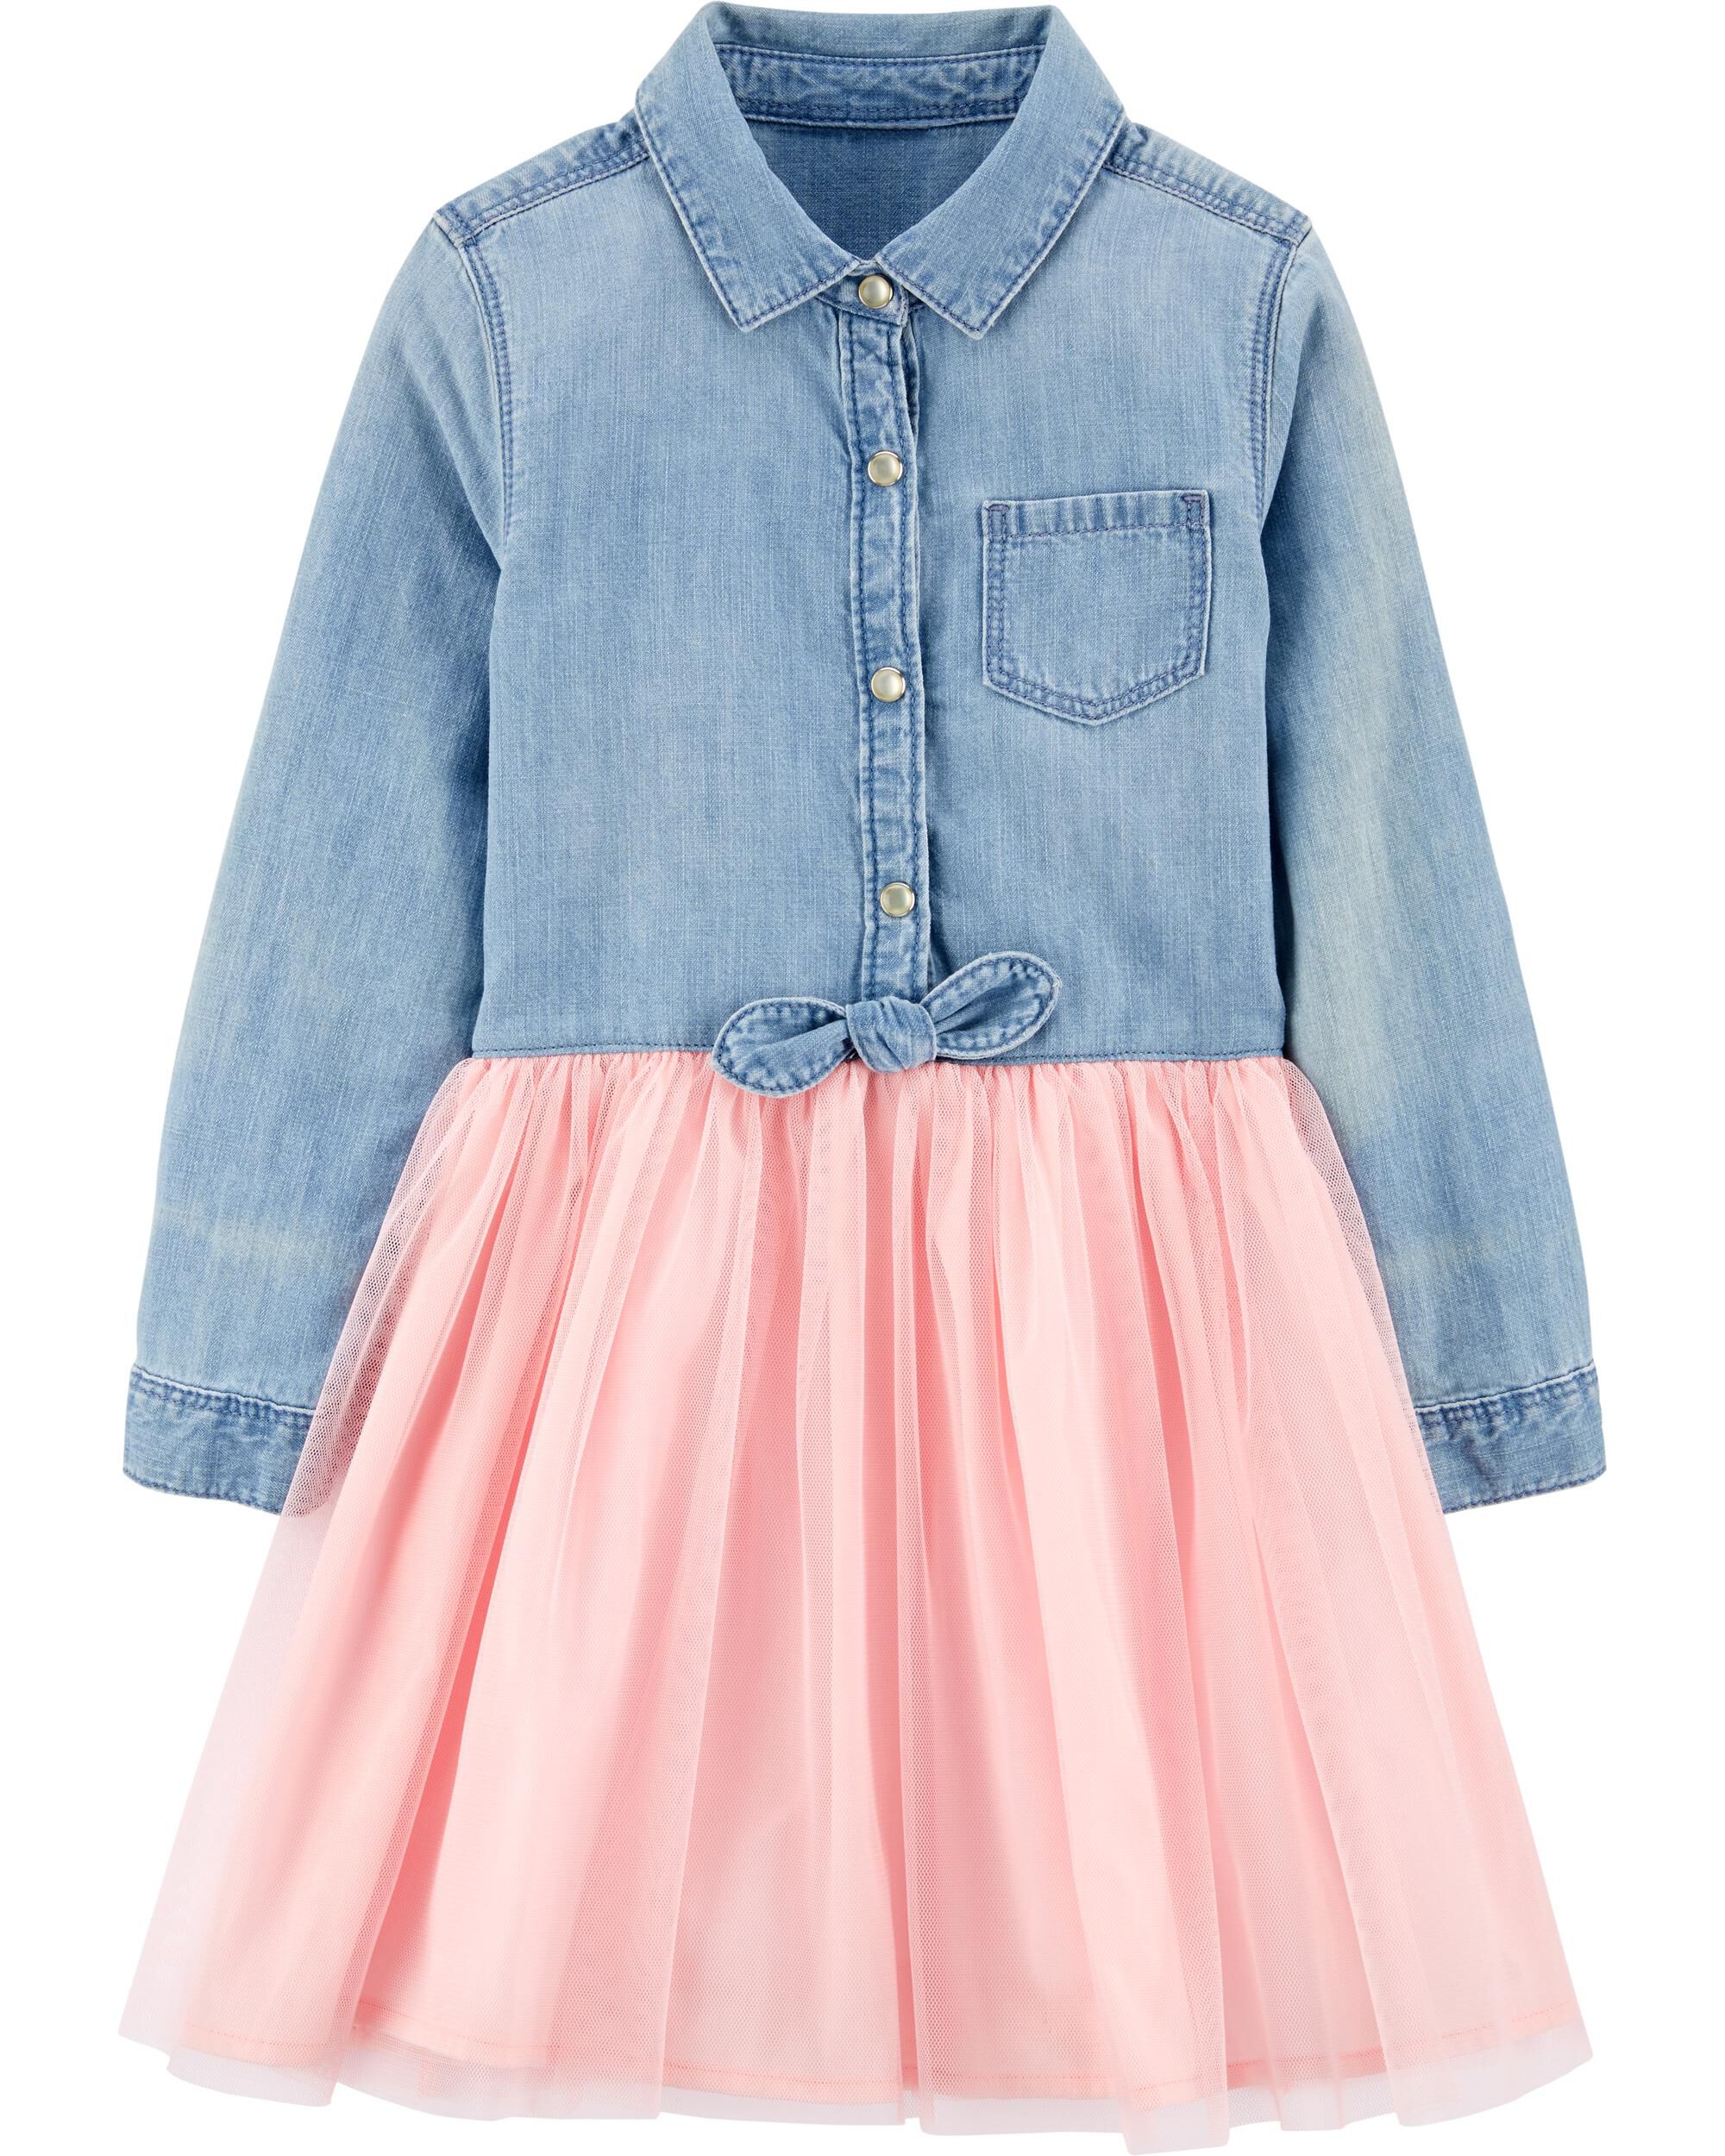 denim and tulle dress